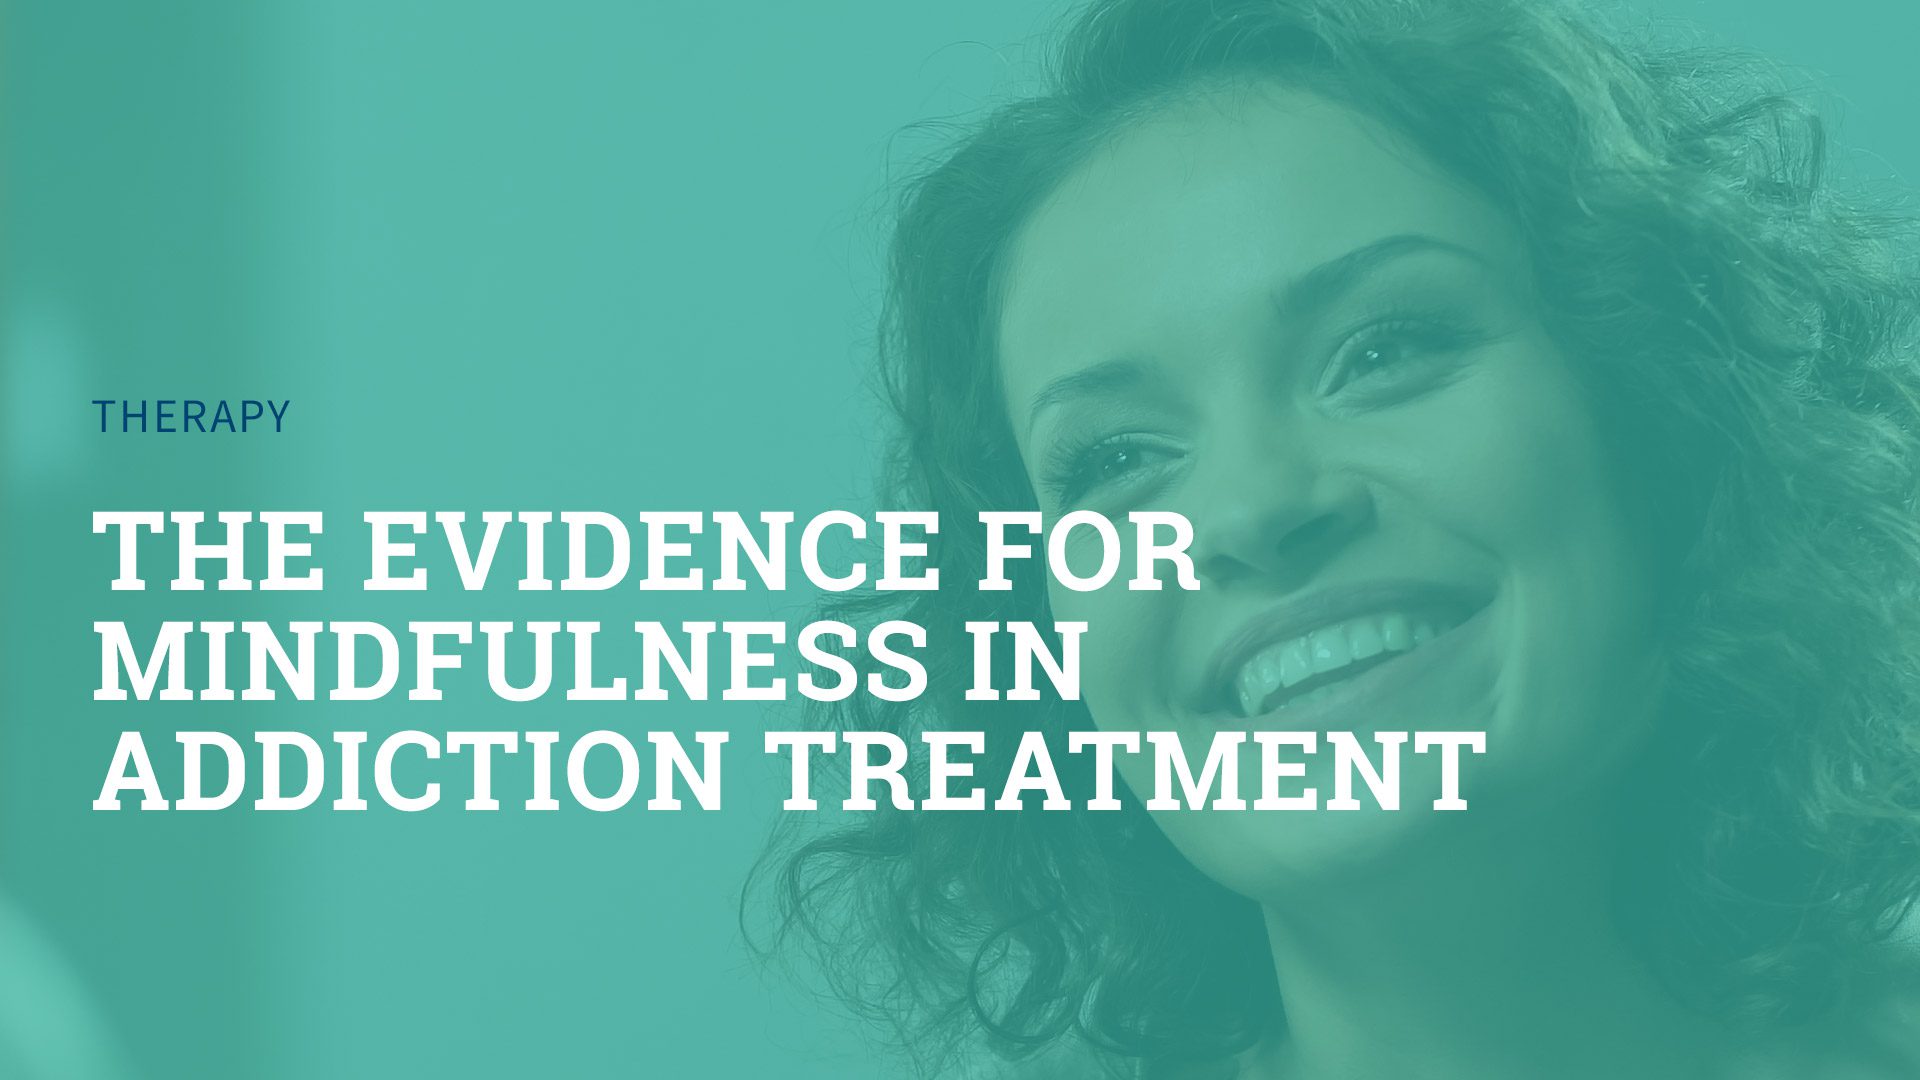 The Evidence for Mindfulness in Addiction Treatment